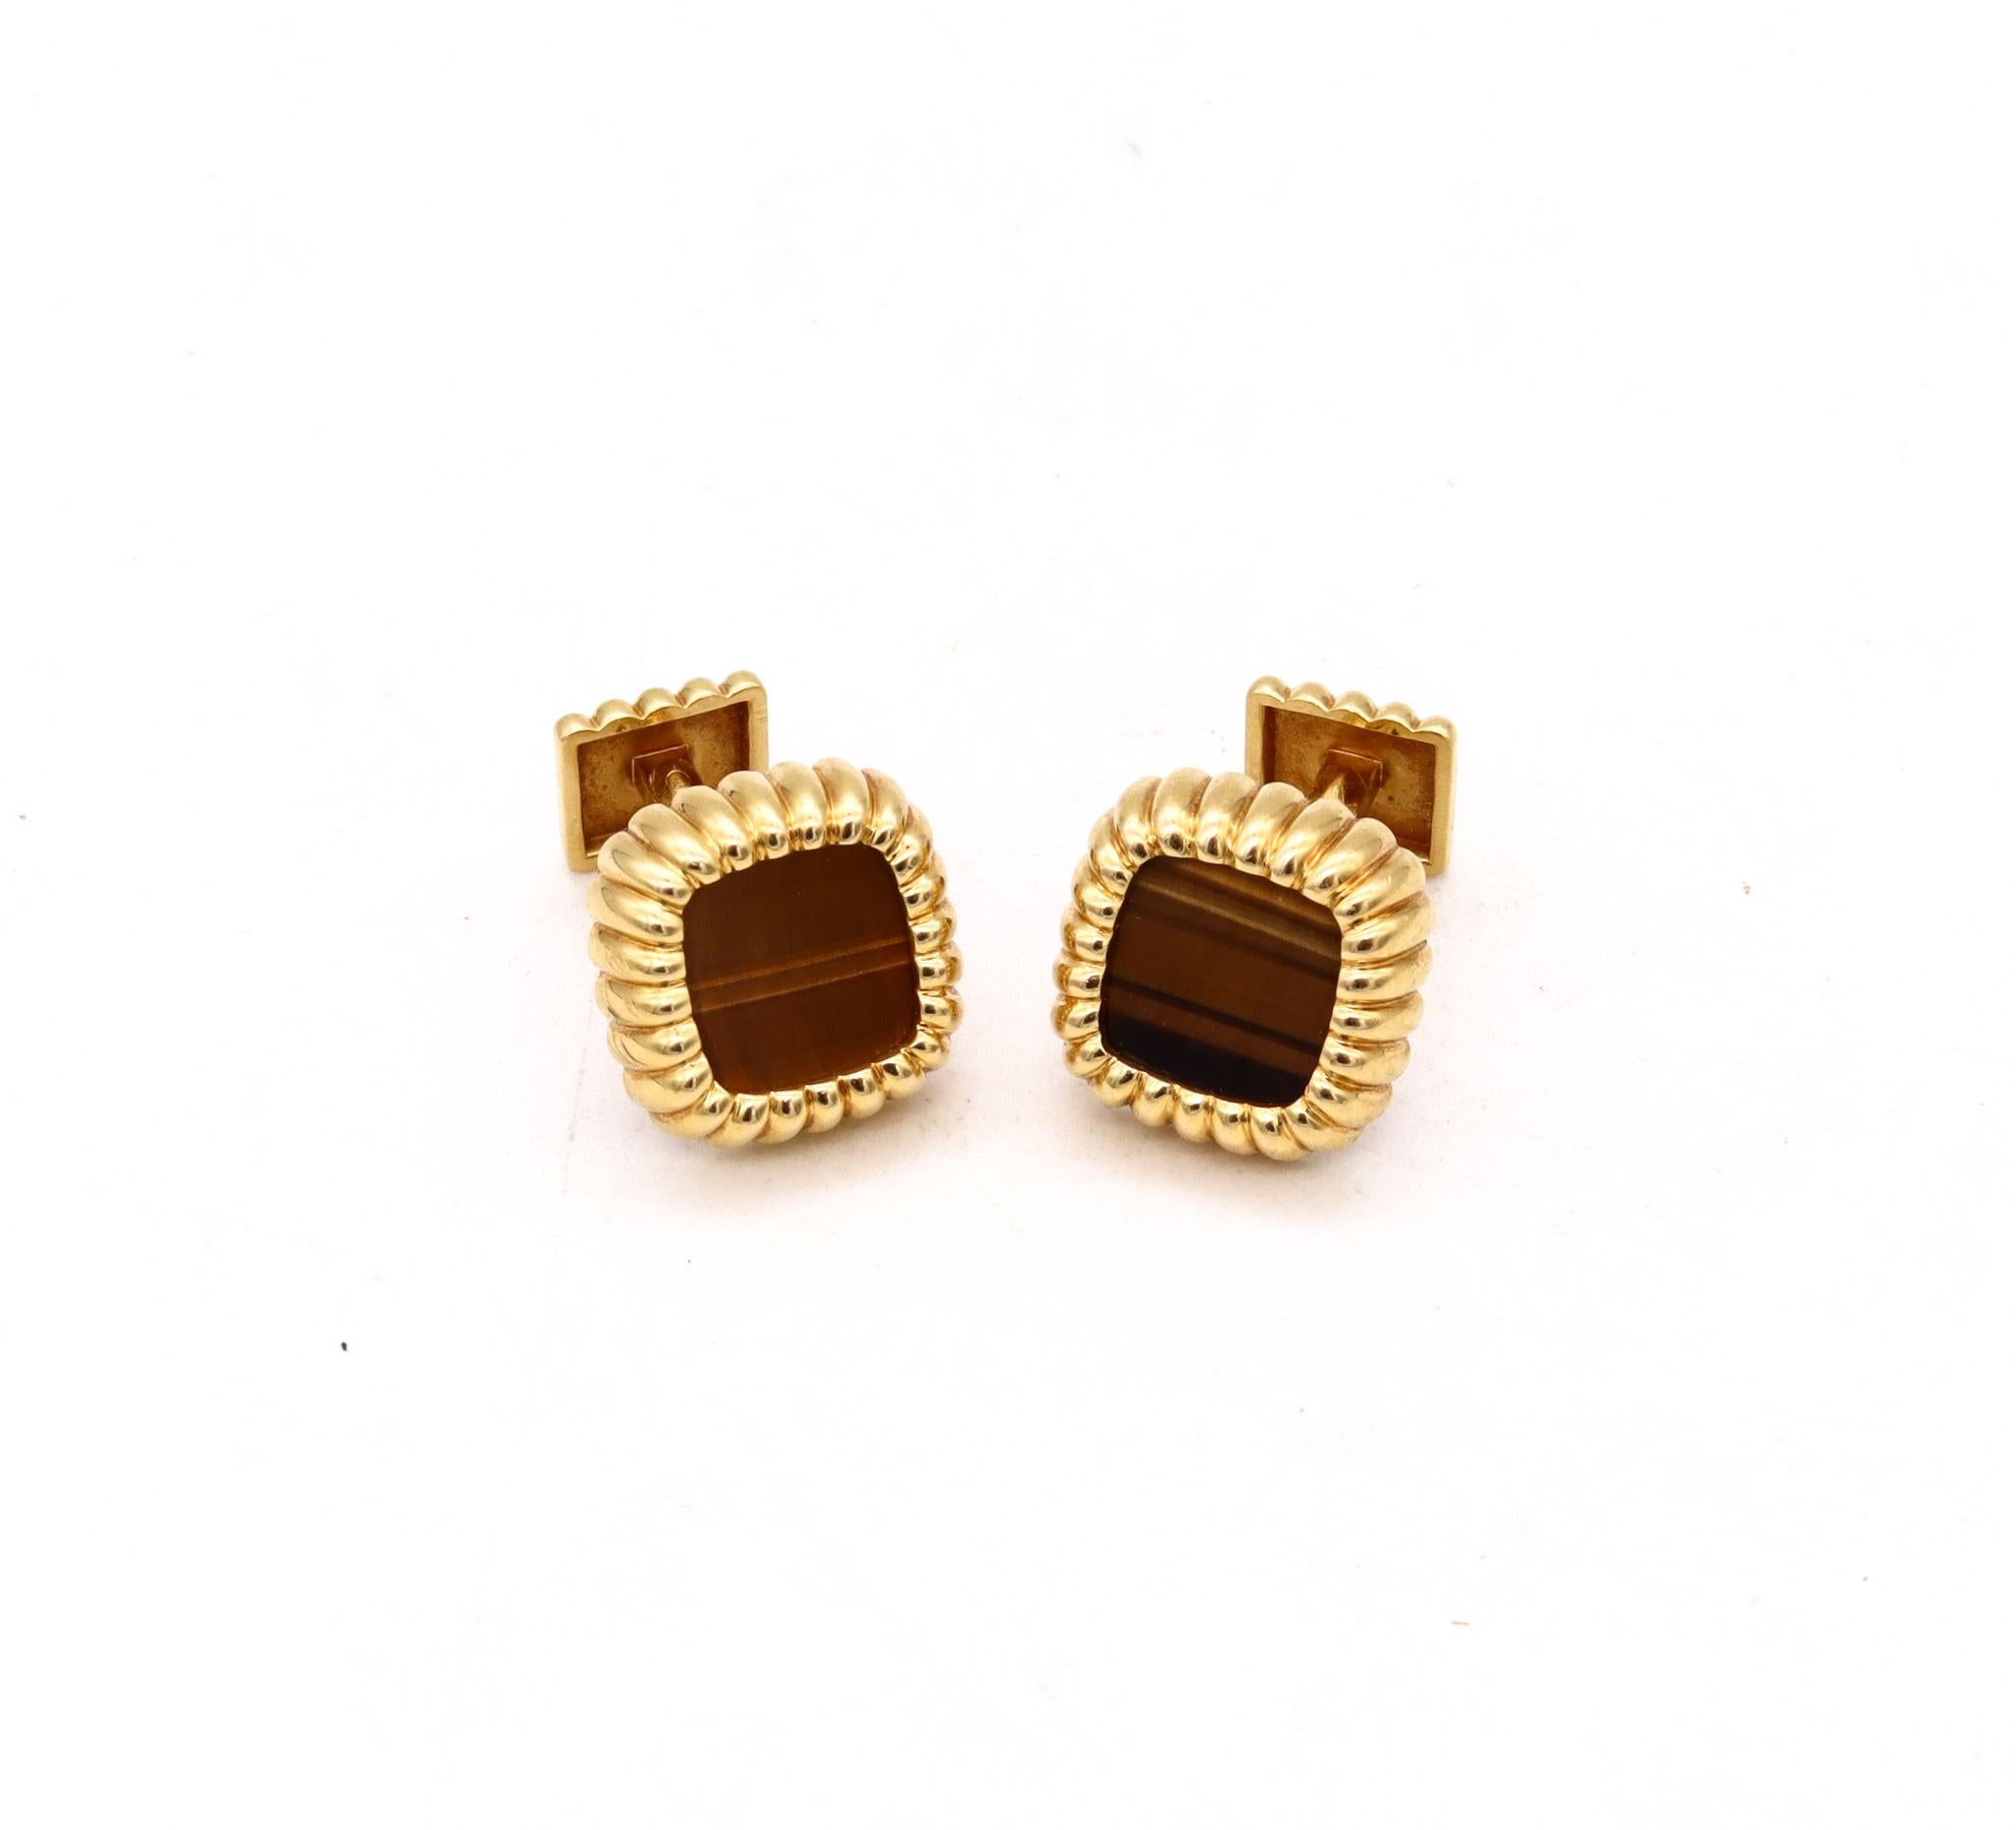 Piaget 1970 by Gubelin Pair of Cufflinks 18Kt Yellow Gold with Tiger Eye Quartz 1